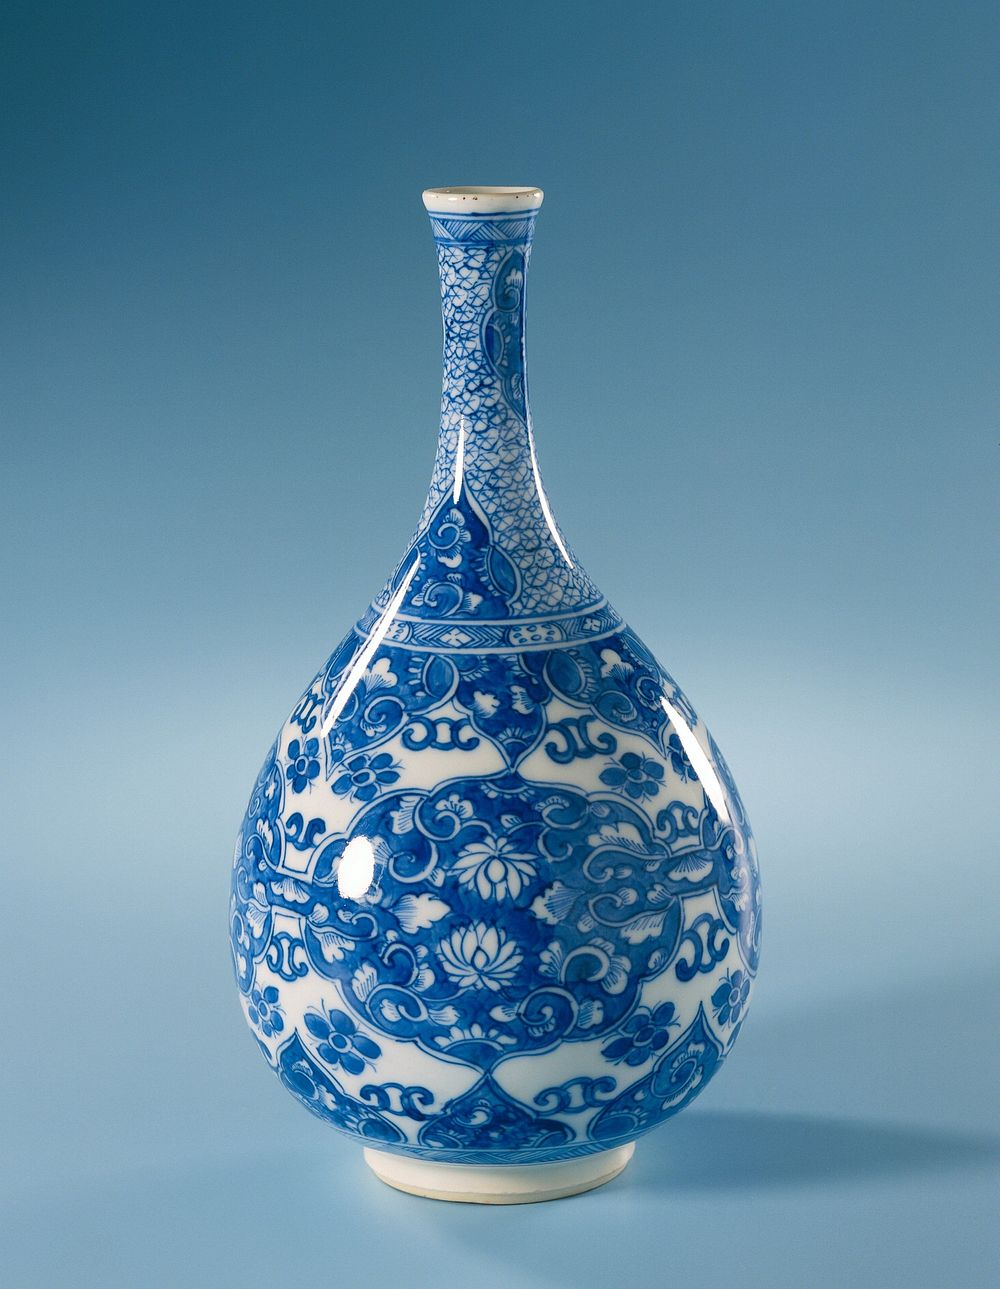 Pear-shaped bottle vase with panels with lotus scrolls (c. 1700 - c. 1724) by anonymous